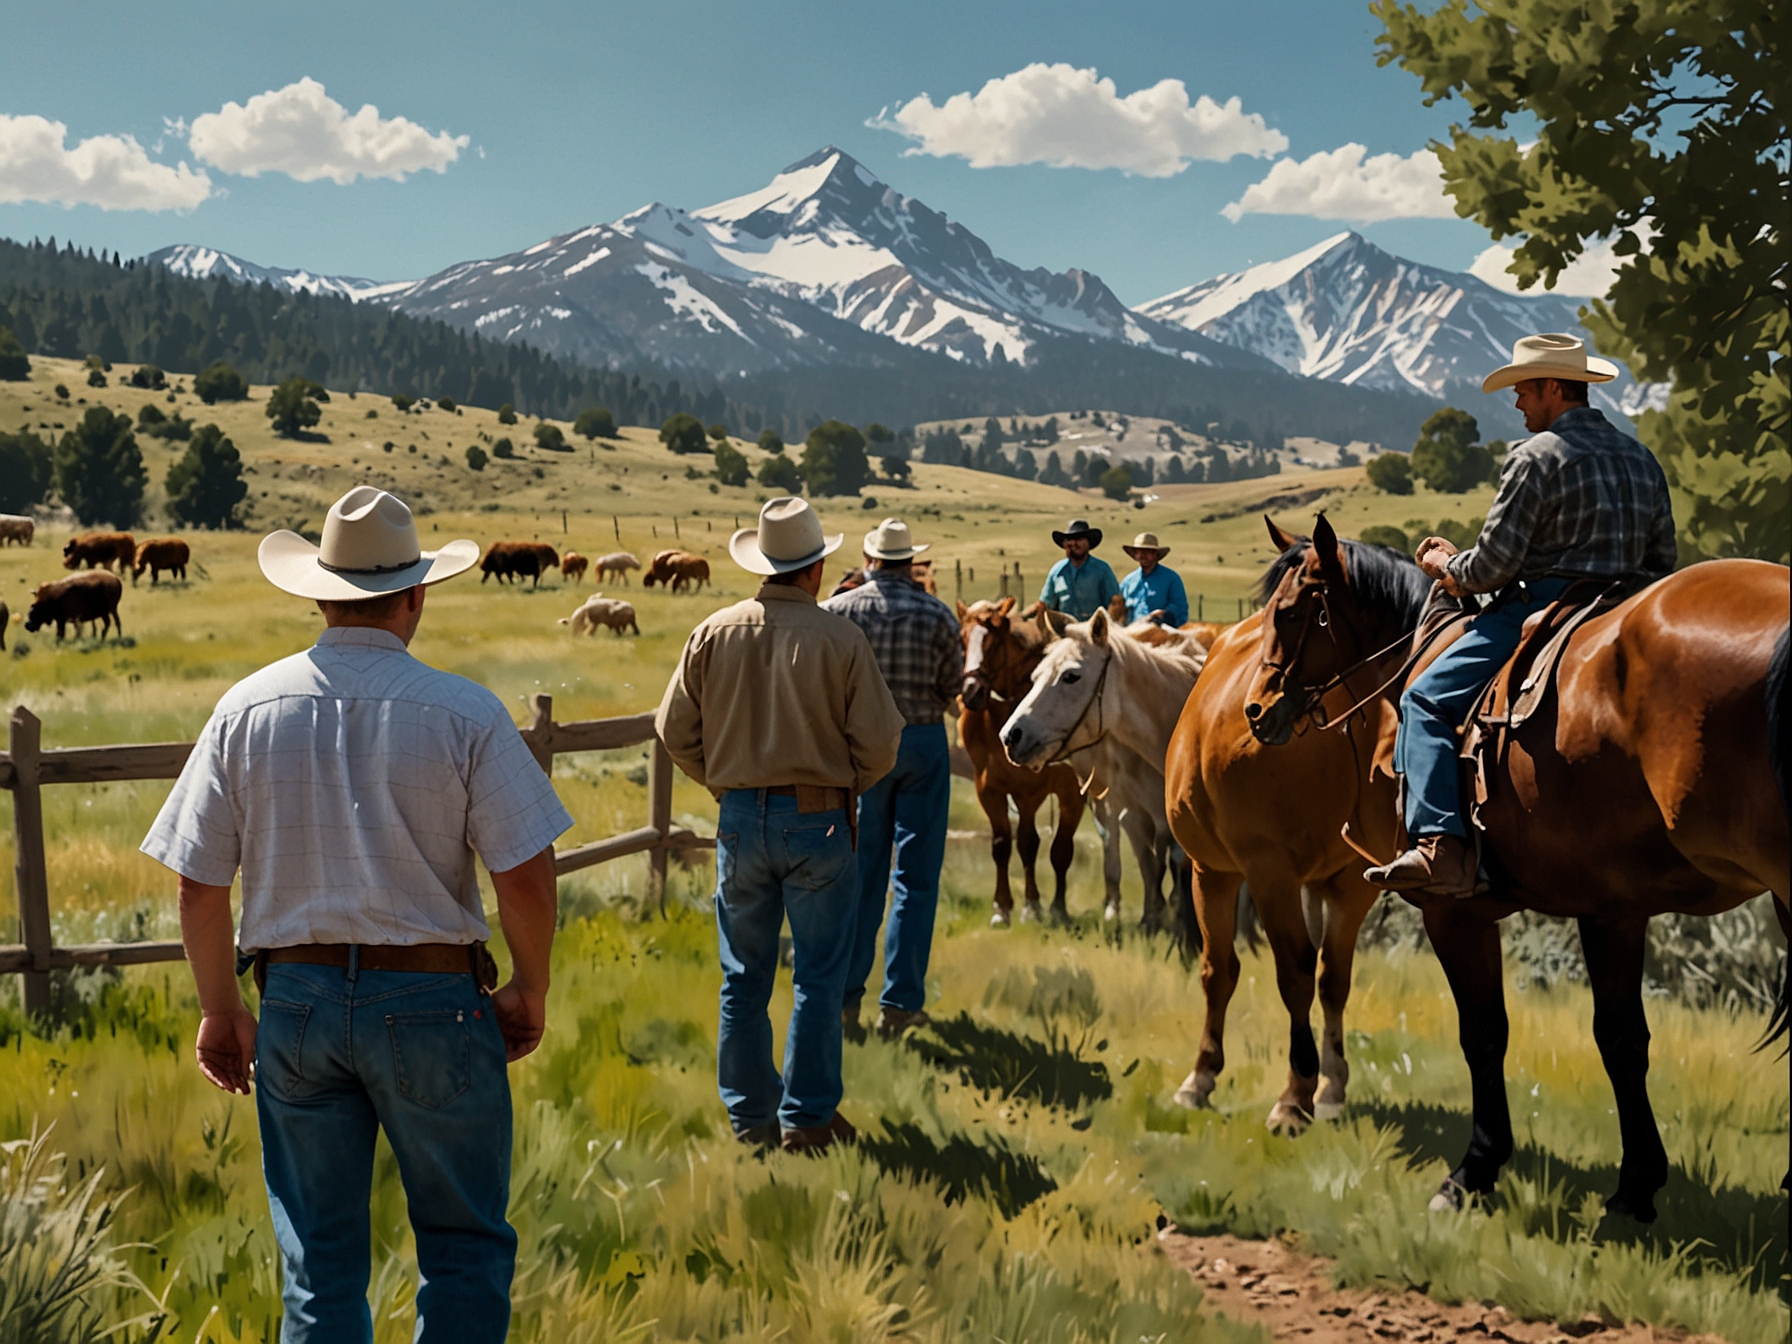 Ranchers at the North Park summit express their concerns to Colorado Parks and Wildlife officials about the impacts of wolf reintroduction on livestock and livelihoods.